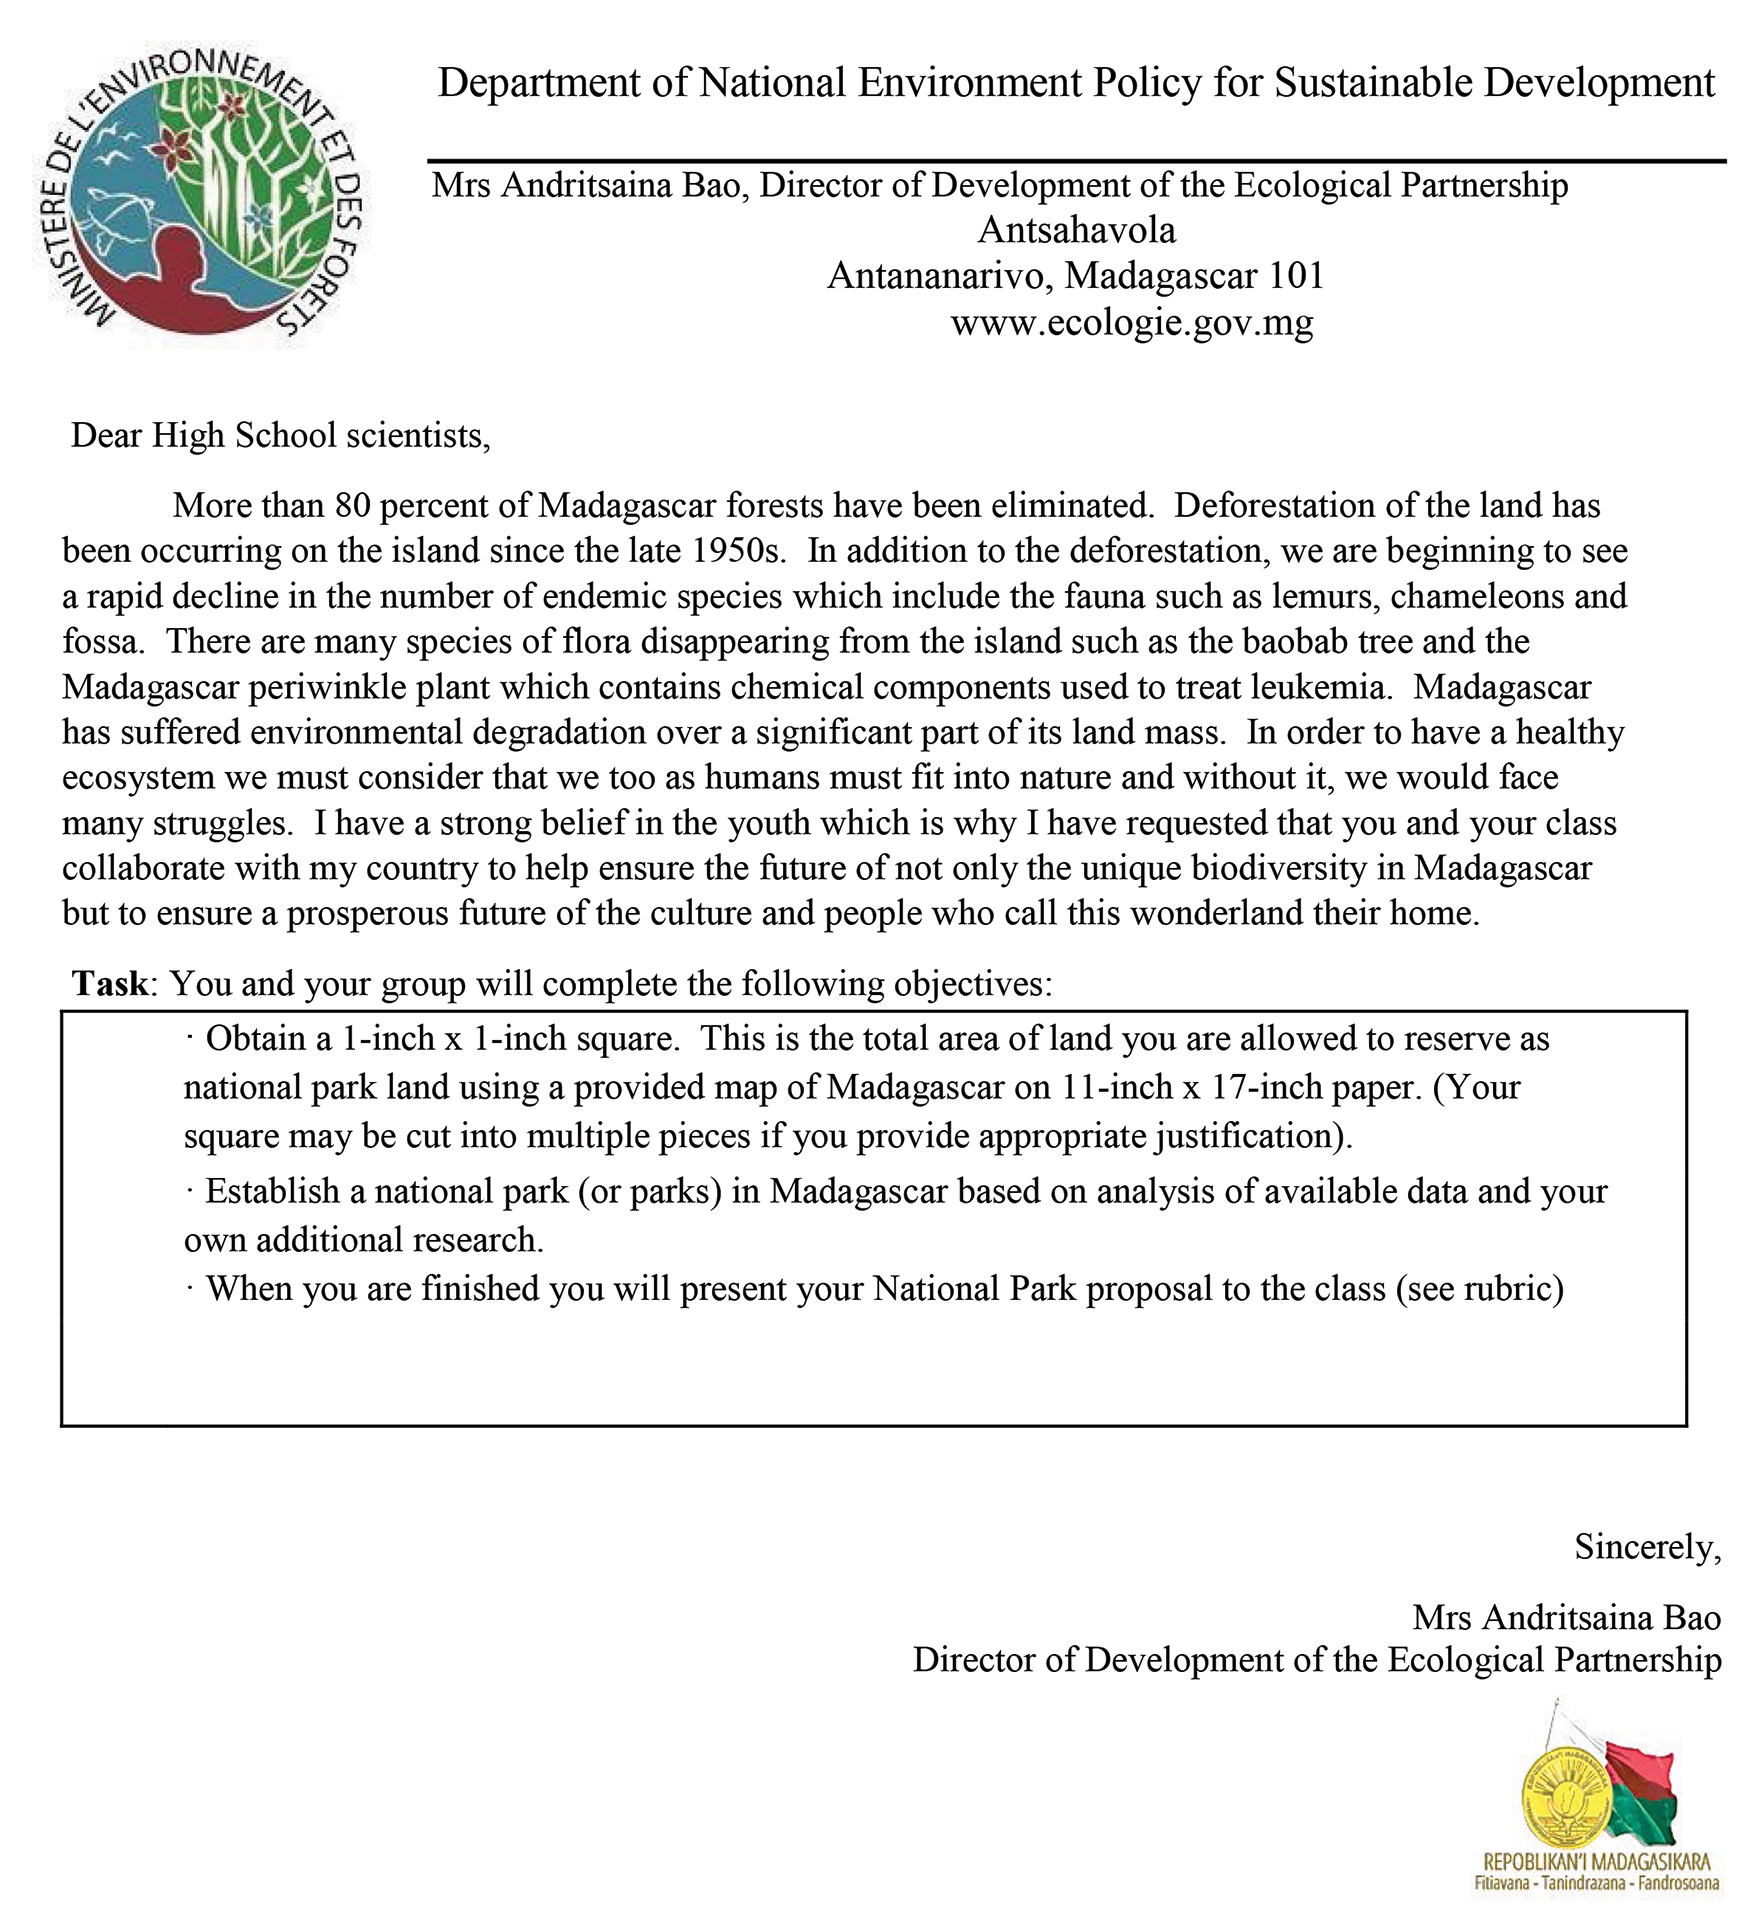 Letter from the government of Madagascar (created for the unit.)